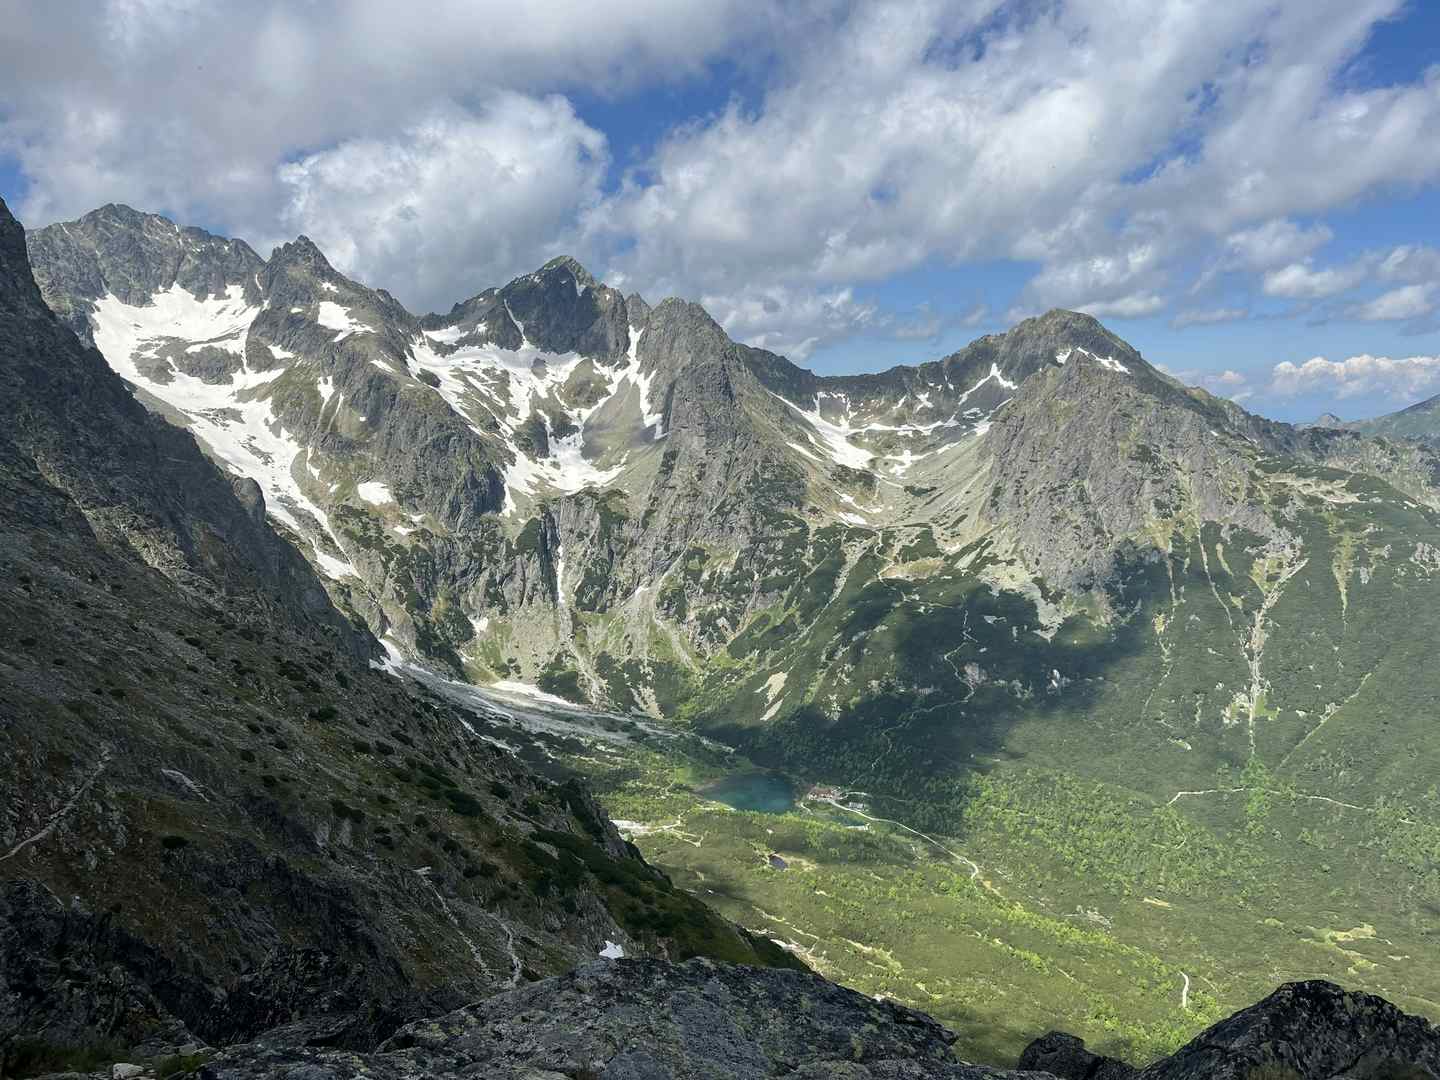 High Tatras - Incredible scenery, guide and company